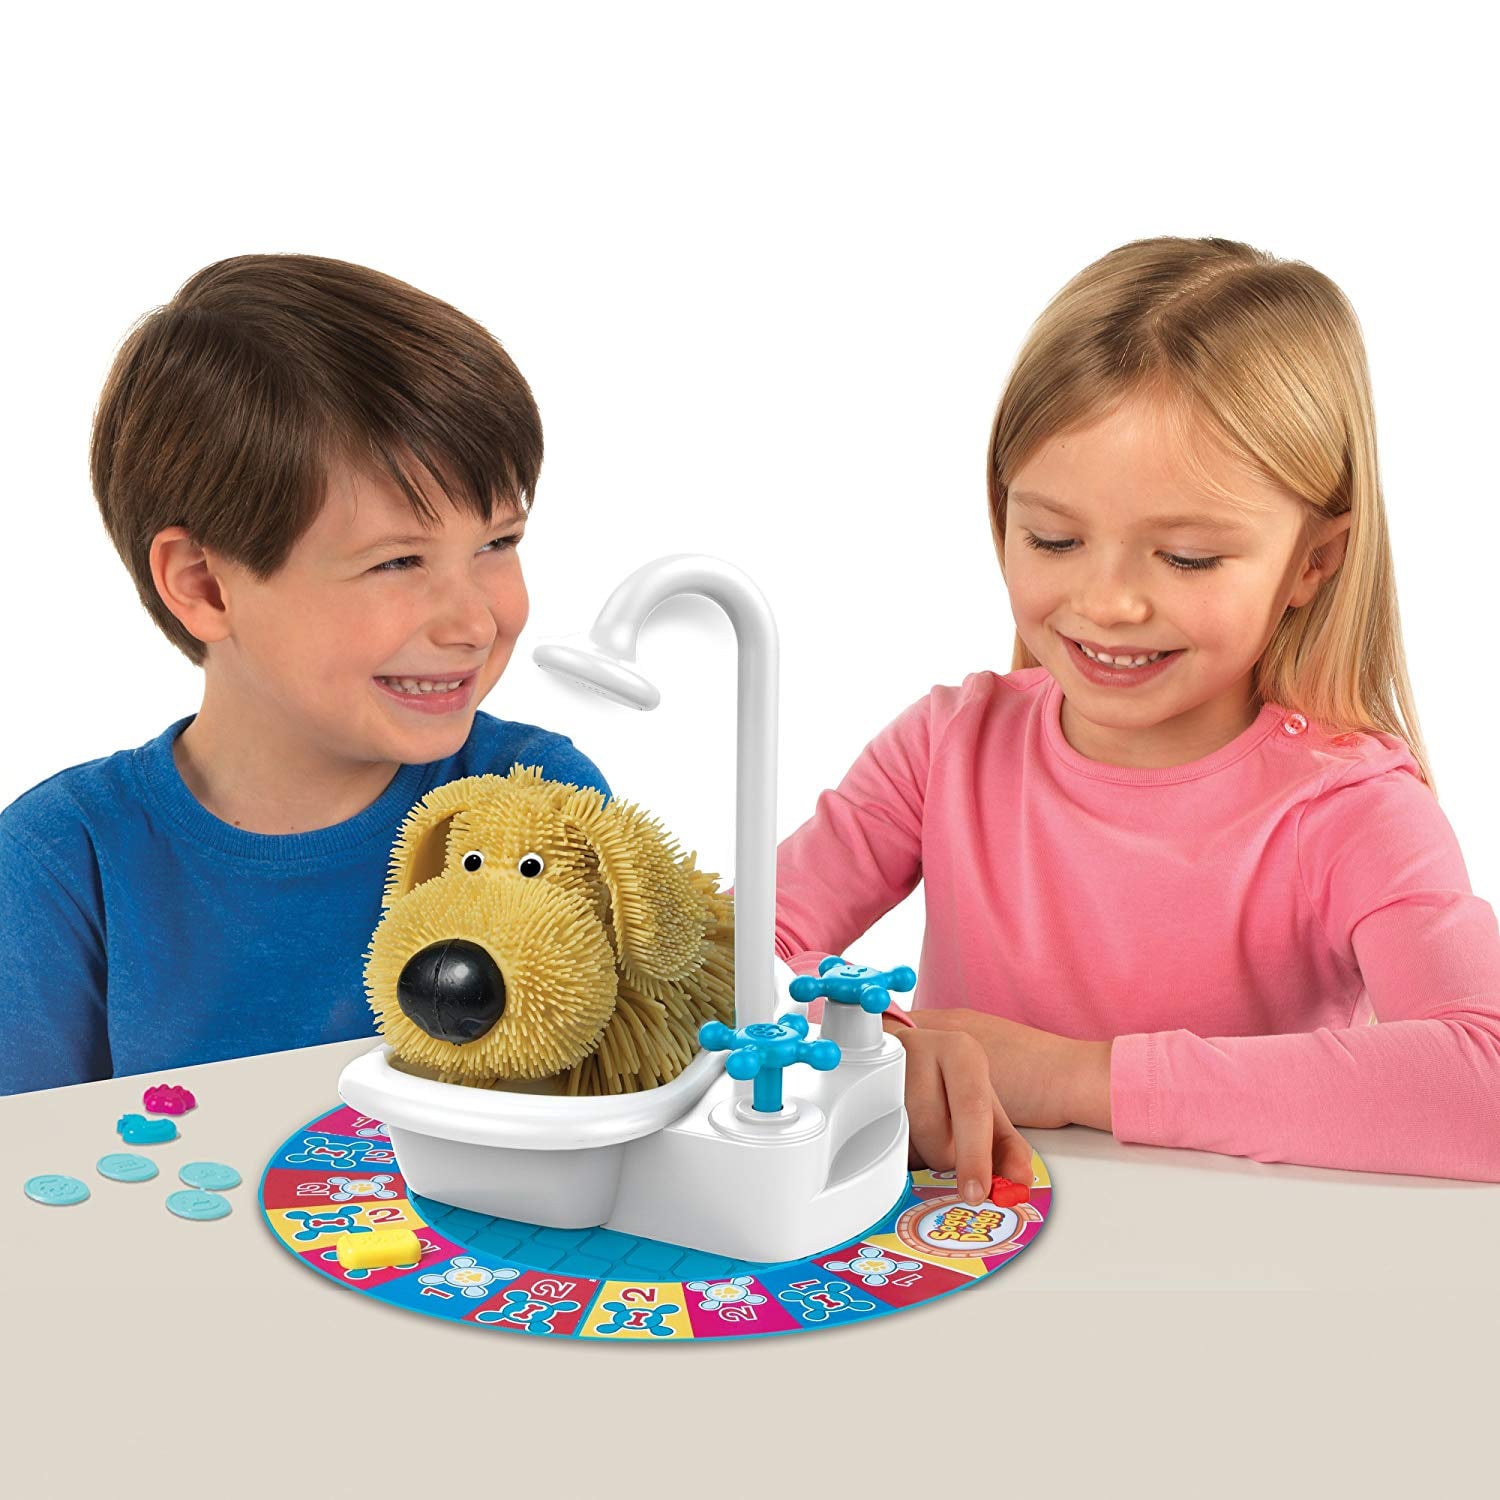 Best Toys For Twins (or Siblings!) in 